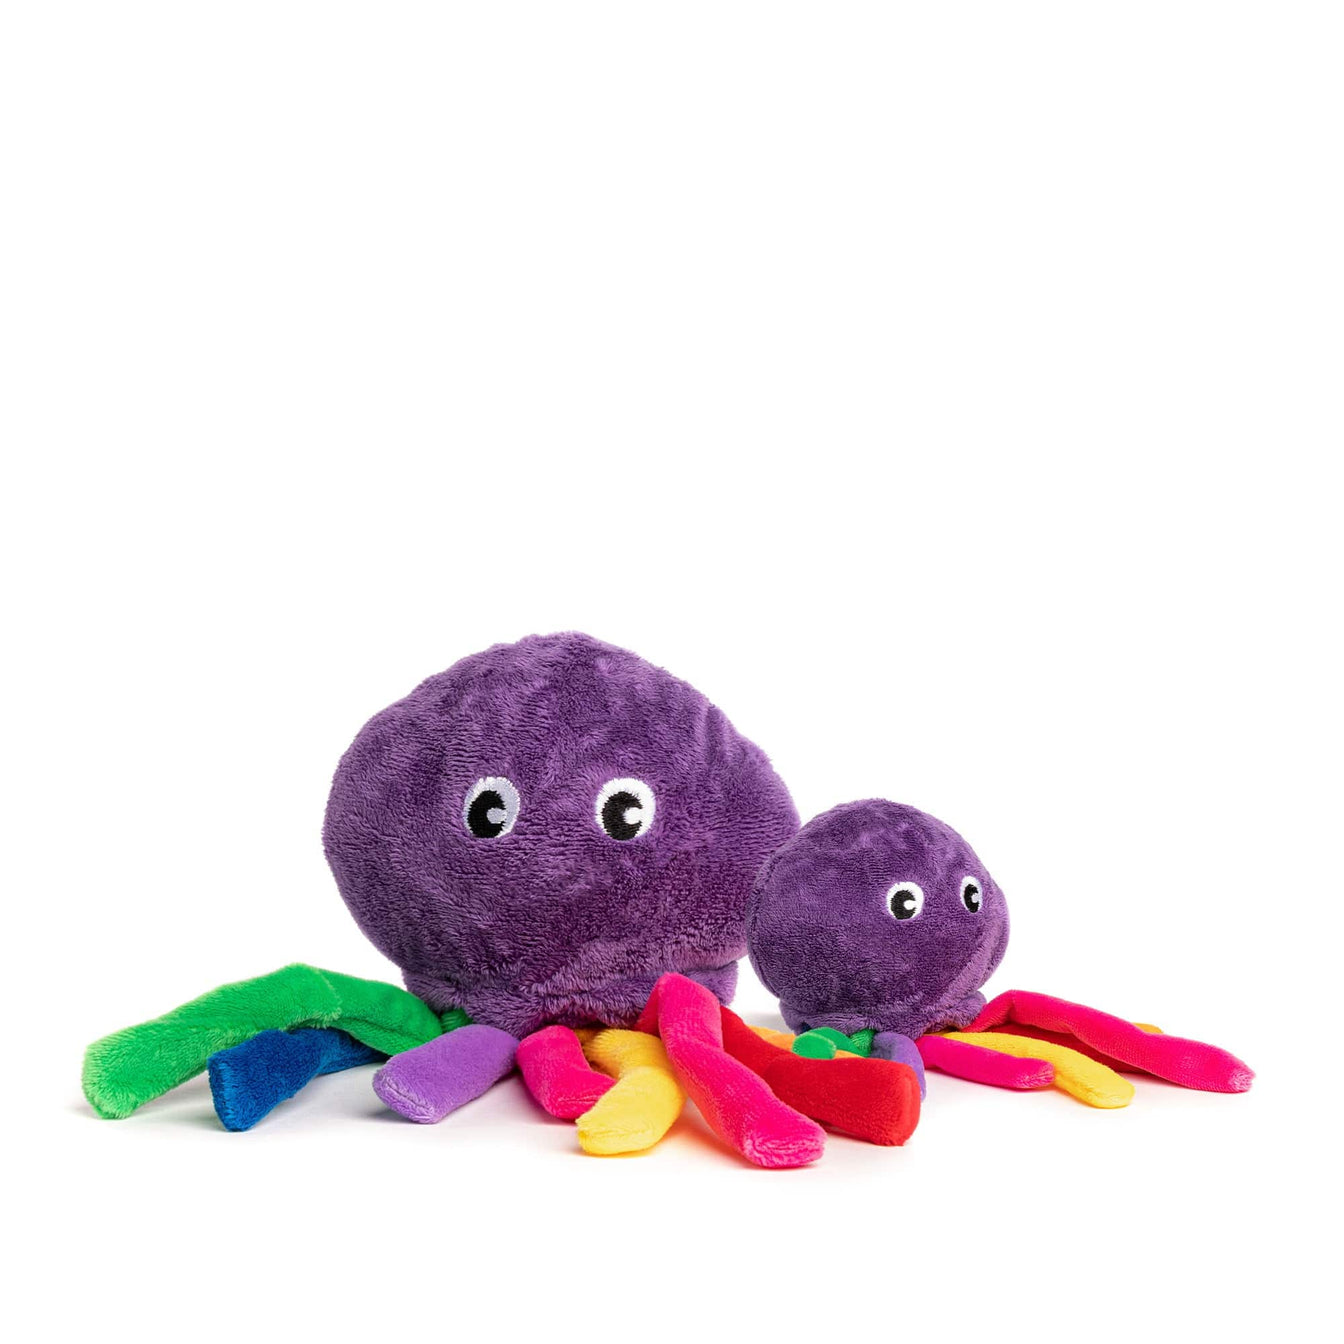 Large Octopus Faball 2 in 1 Dog Toy.   Soft Toy on outside with TPR Squeaker Ball on inside